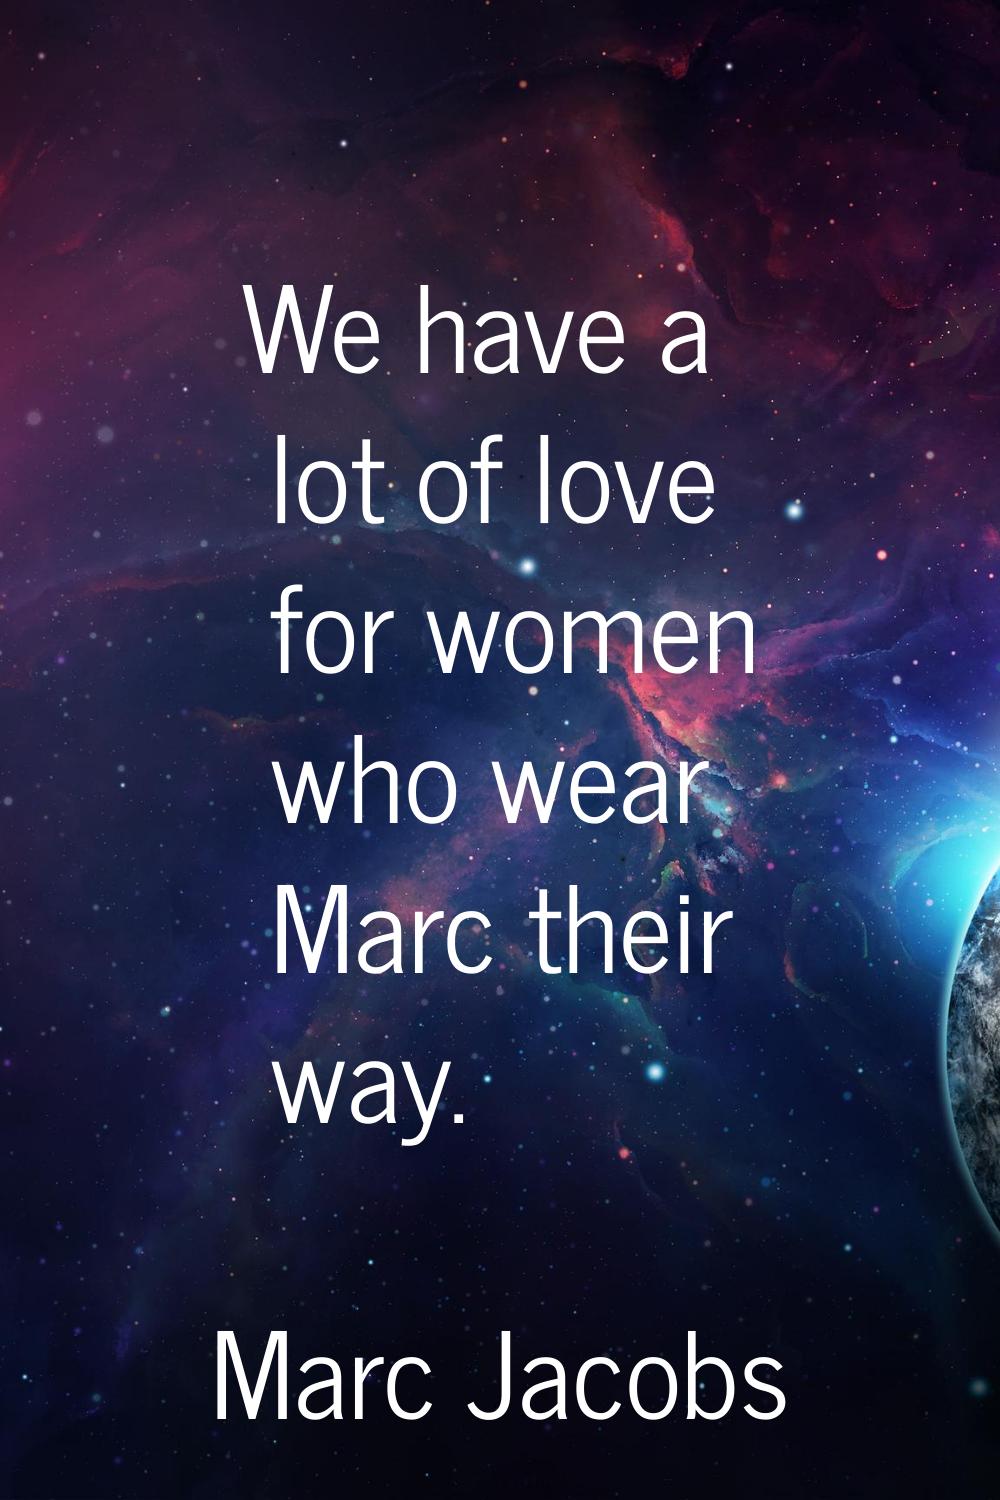 We have a lot of love for women who wear Marc their way.